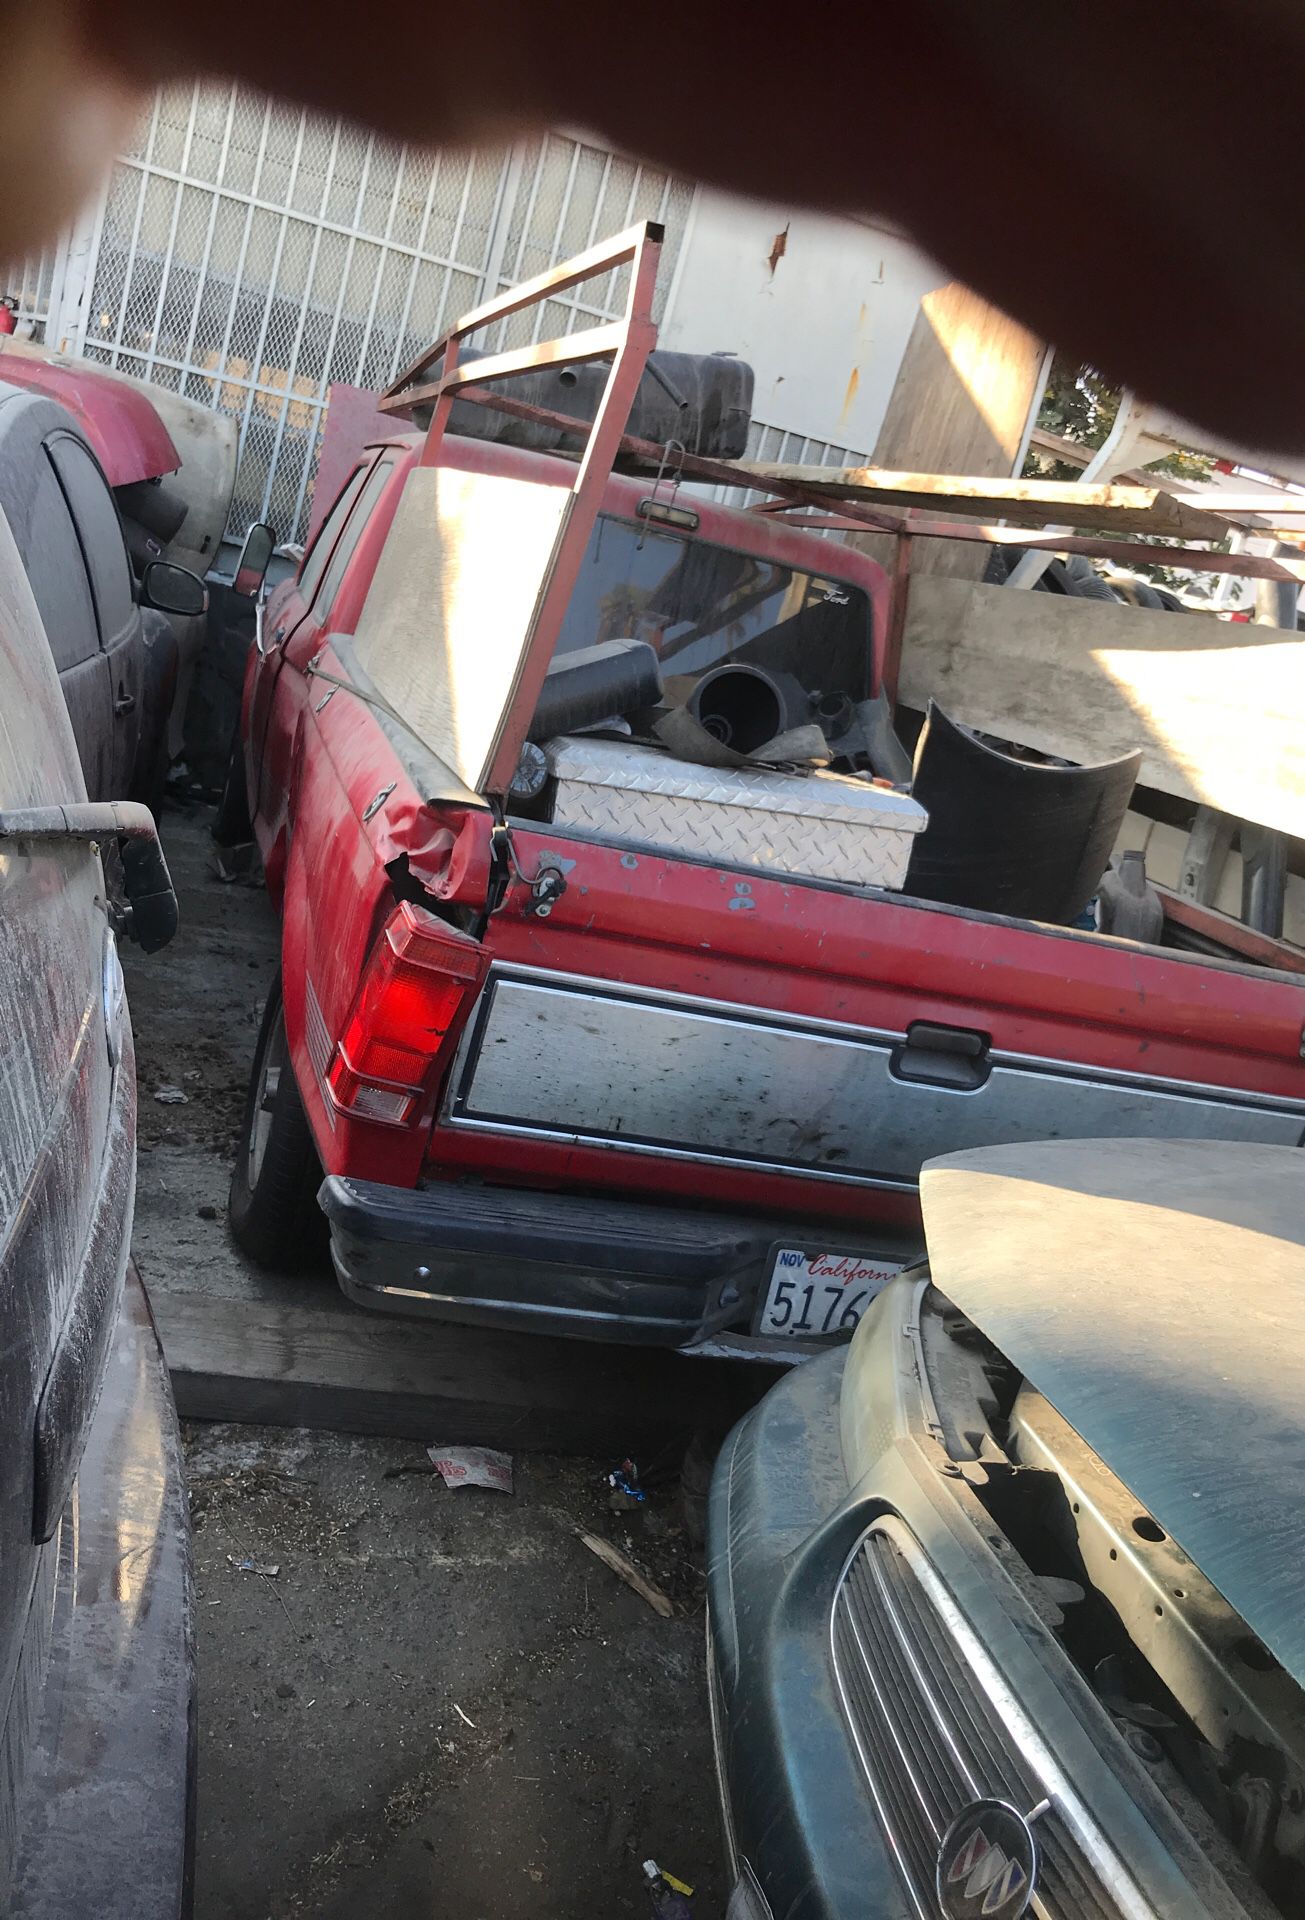 92 Ford ranger pick up truck for parts manual